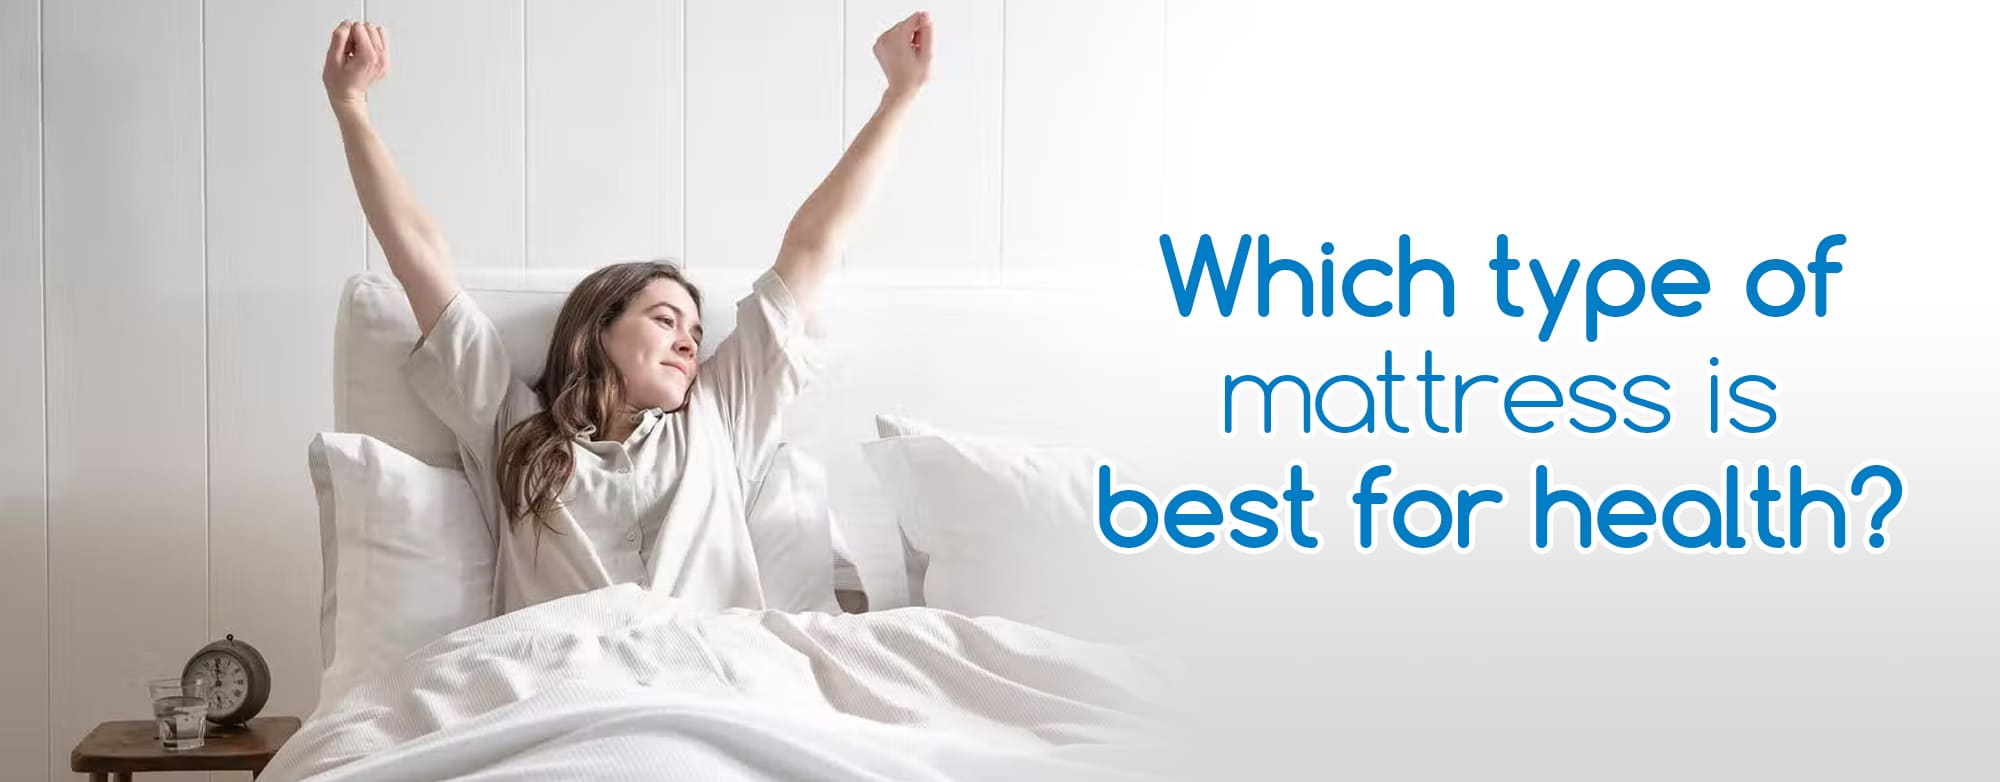 best type of mattress for health